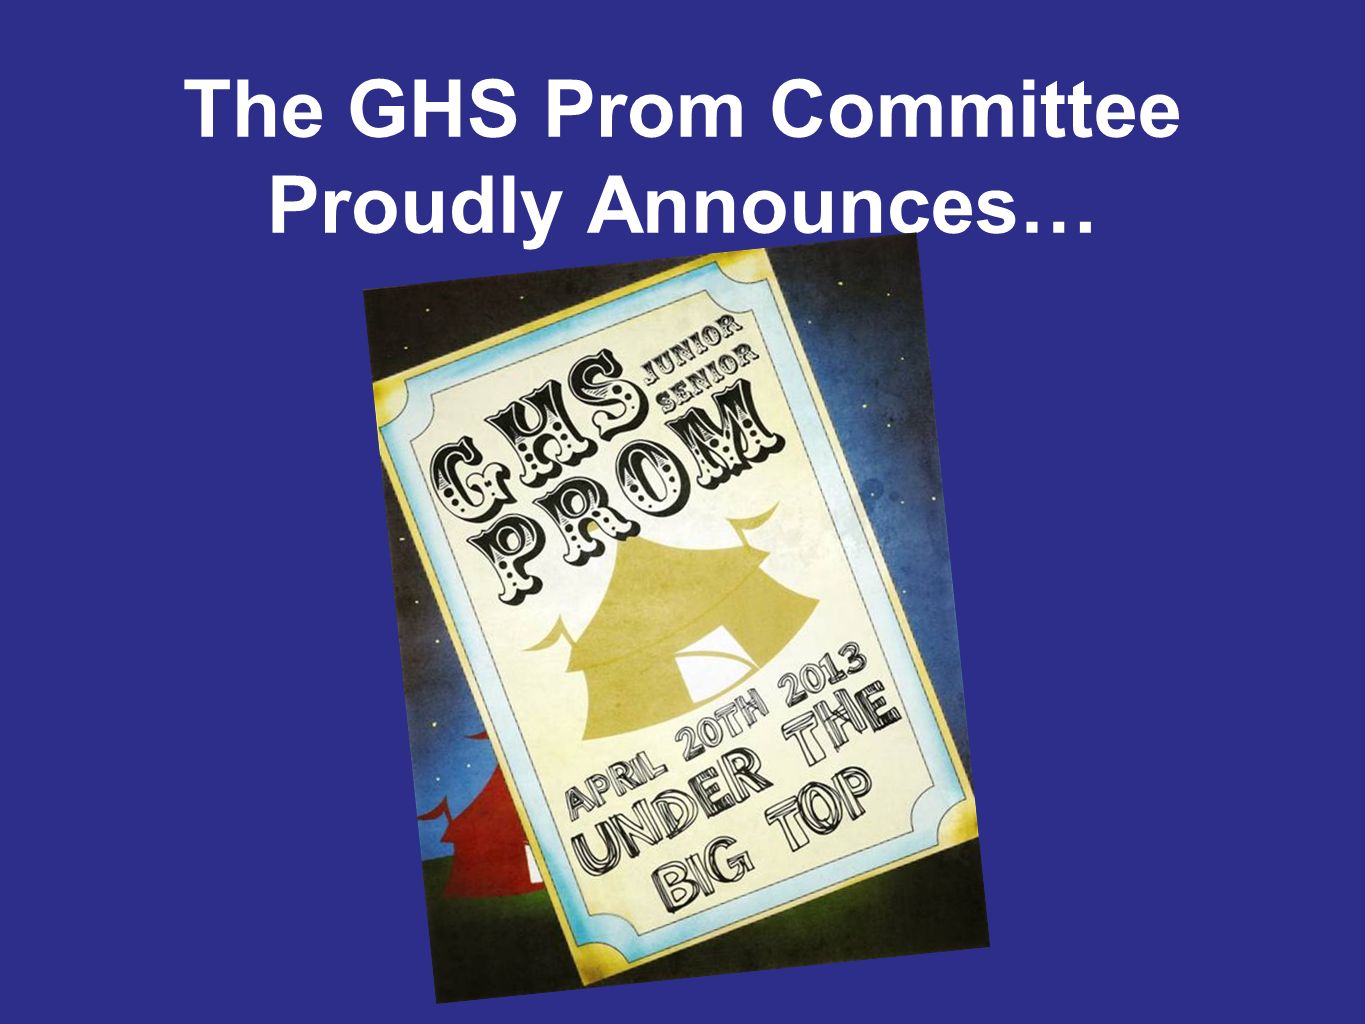 The GHS Prom Committee Proudly Announces…